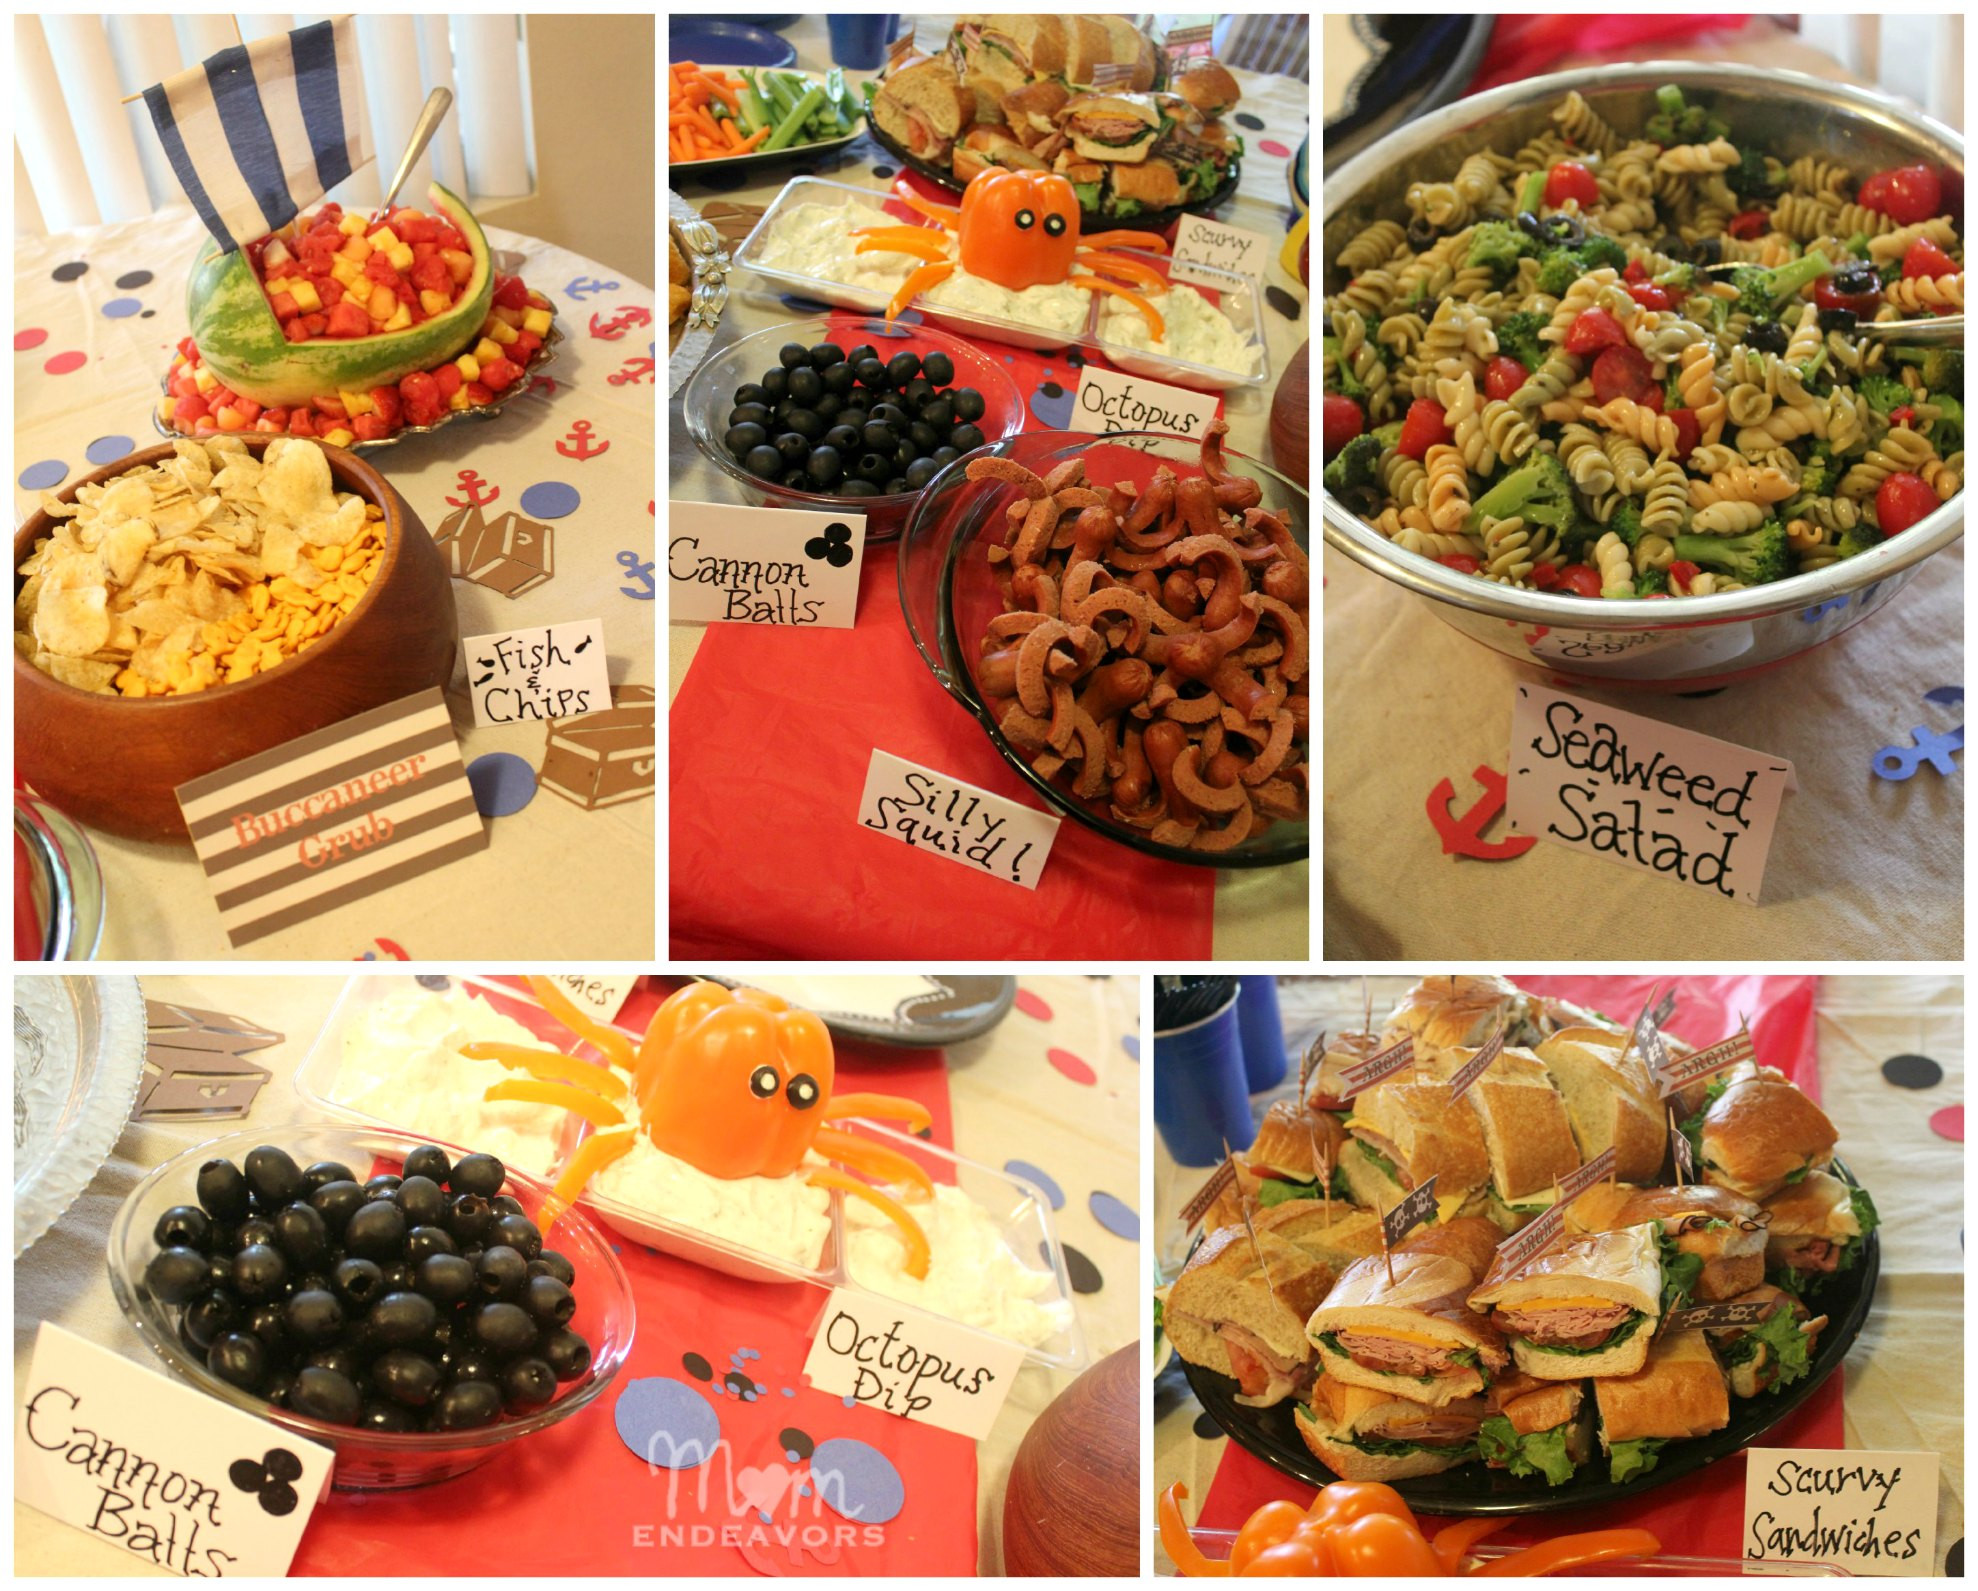 Birthday Party Food Ideas
 Jake and the Never Land Pirates Birthday Party Food